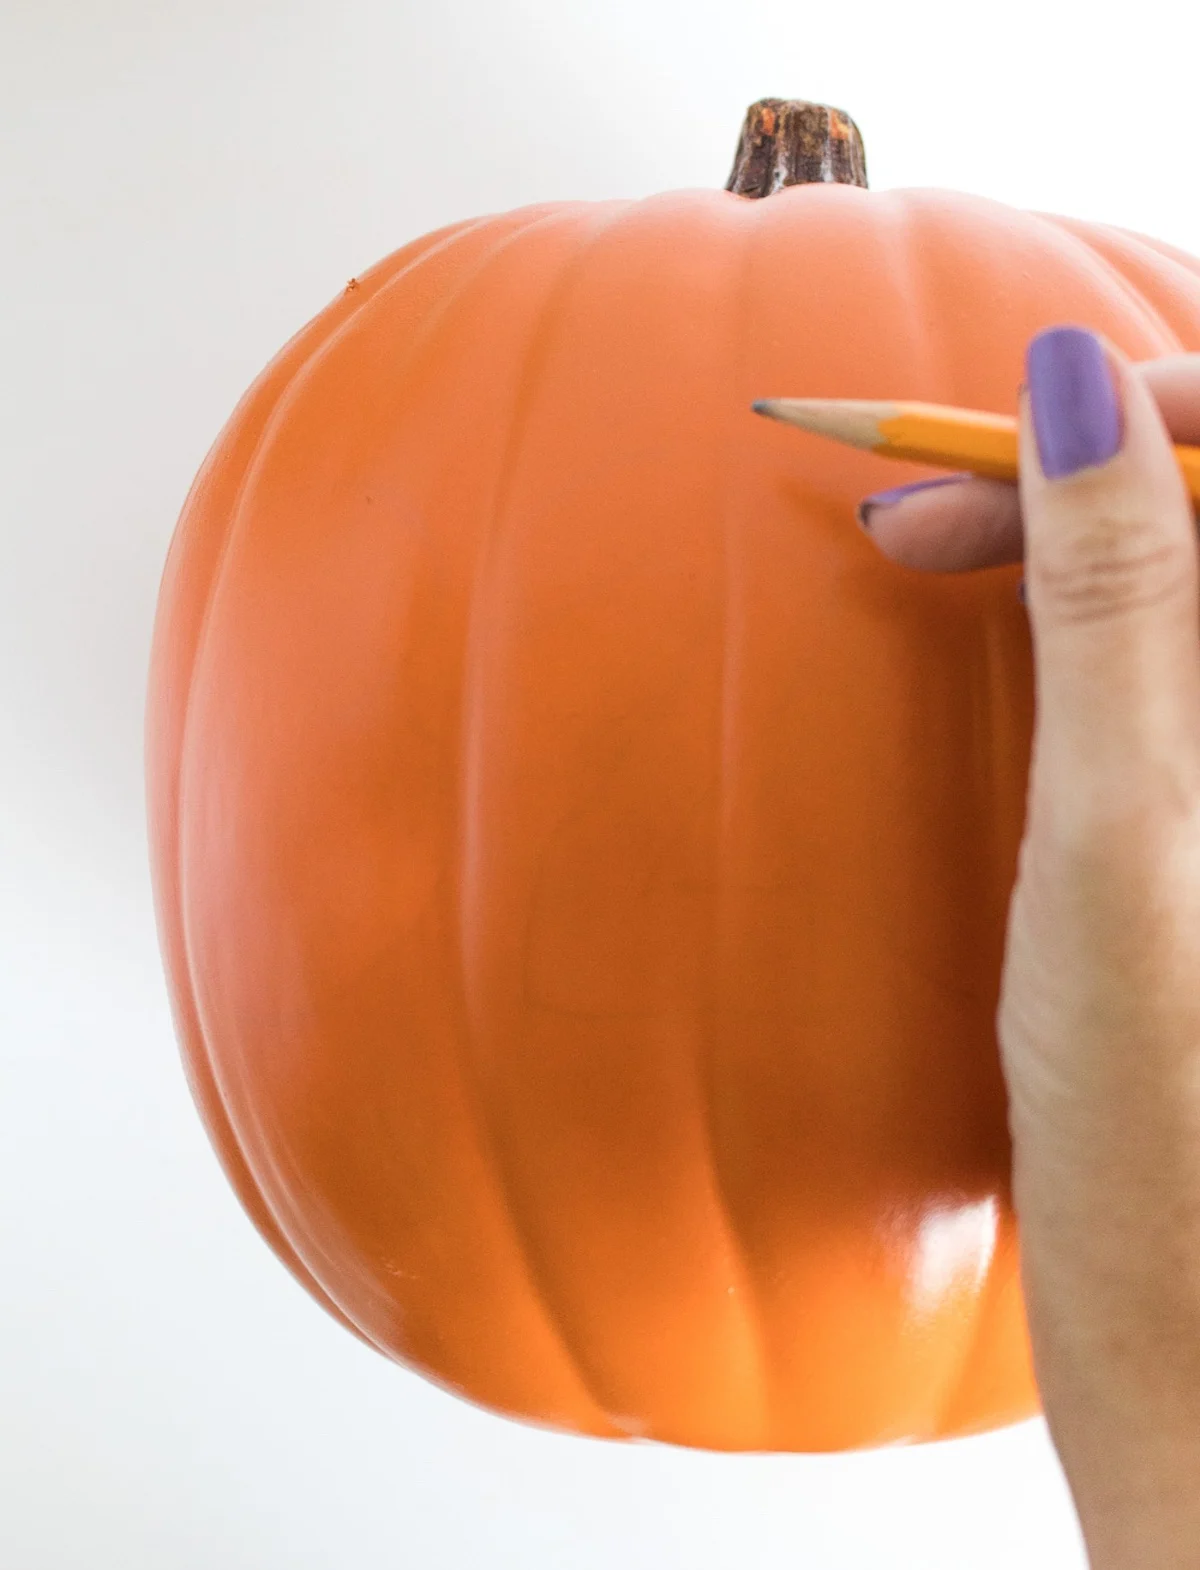 drawing the house number on the pumpkin with a pencil